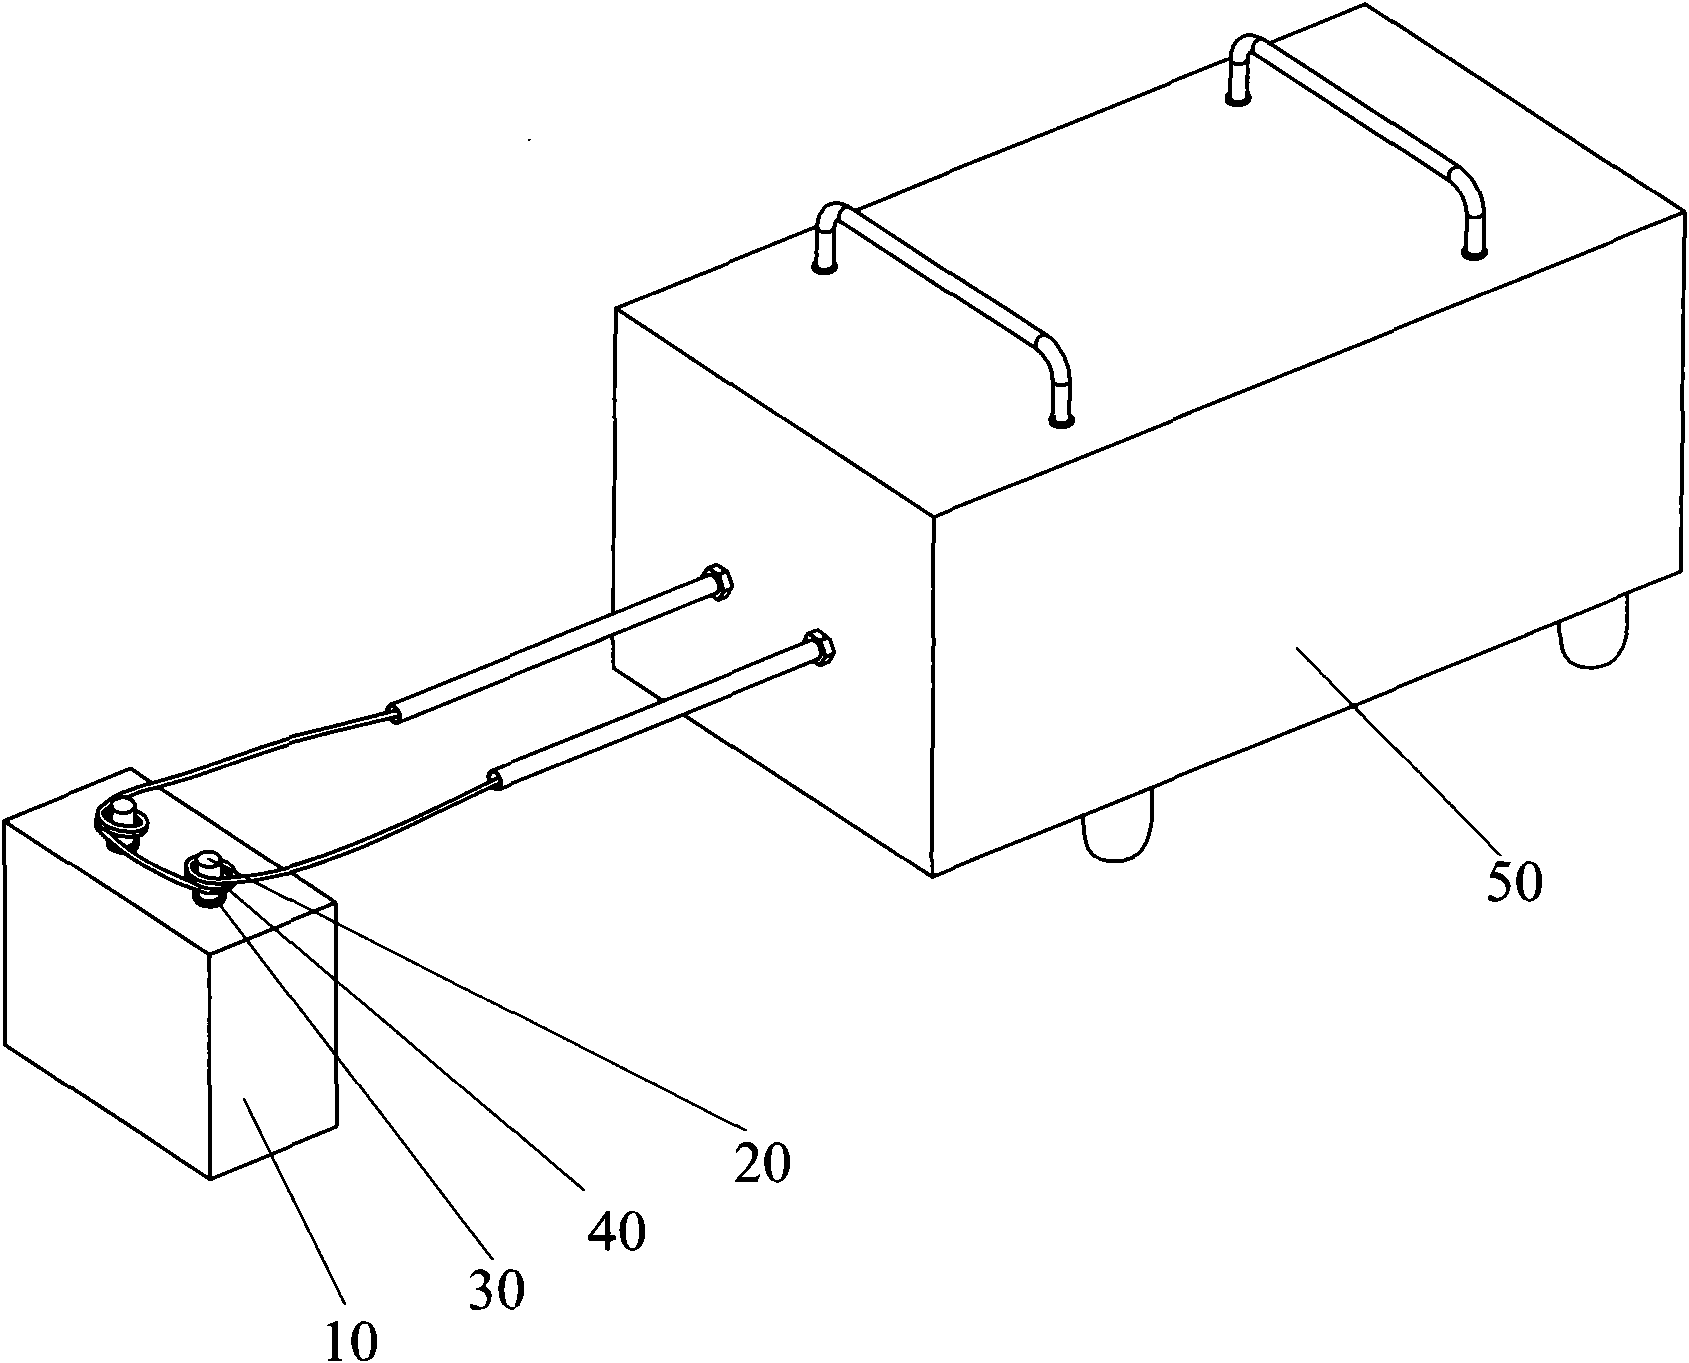 Method for sealing shielding can